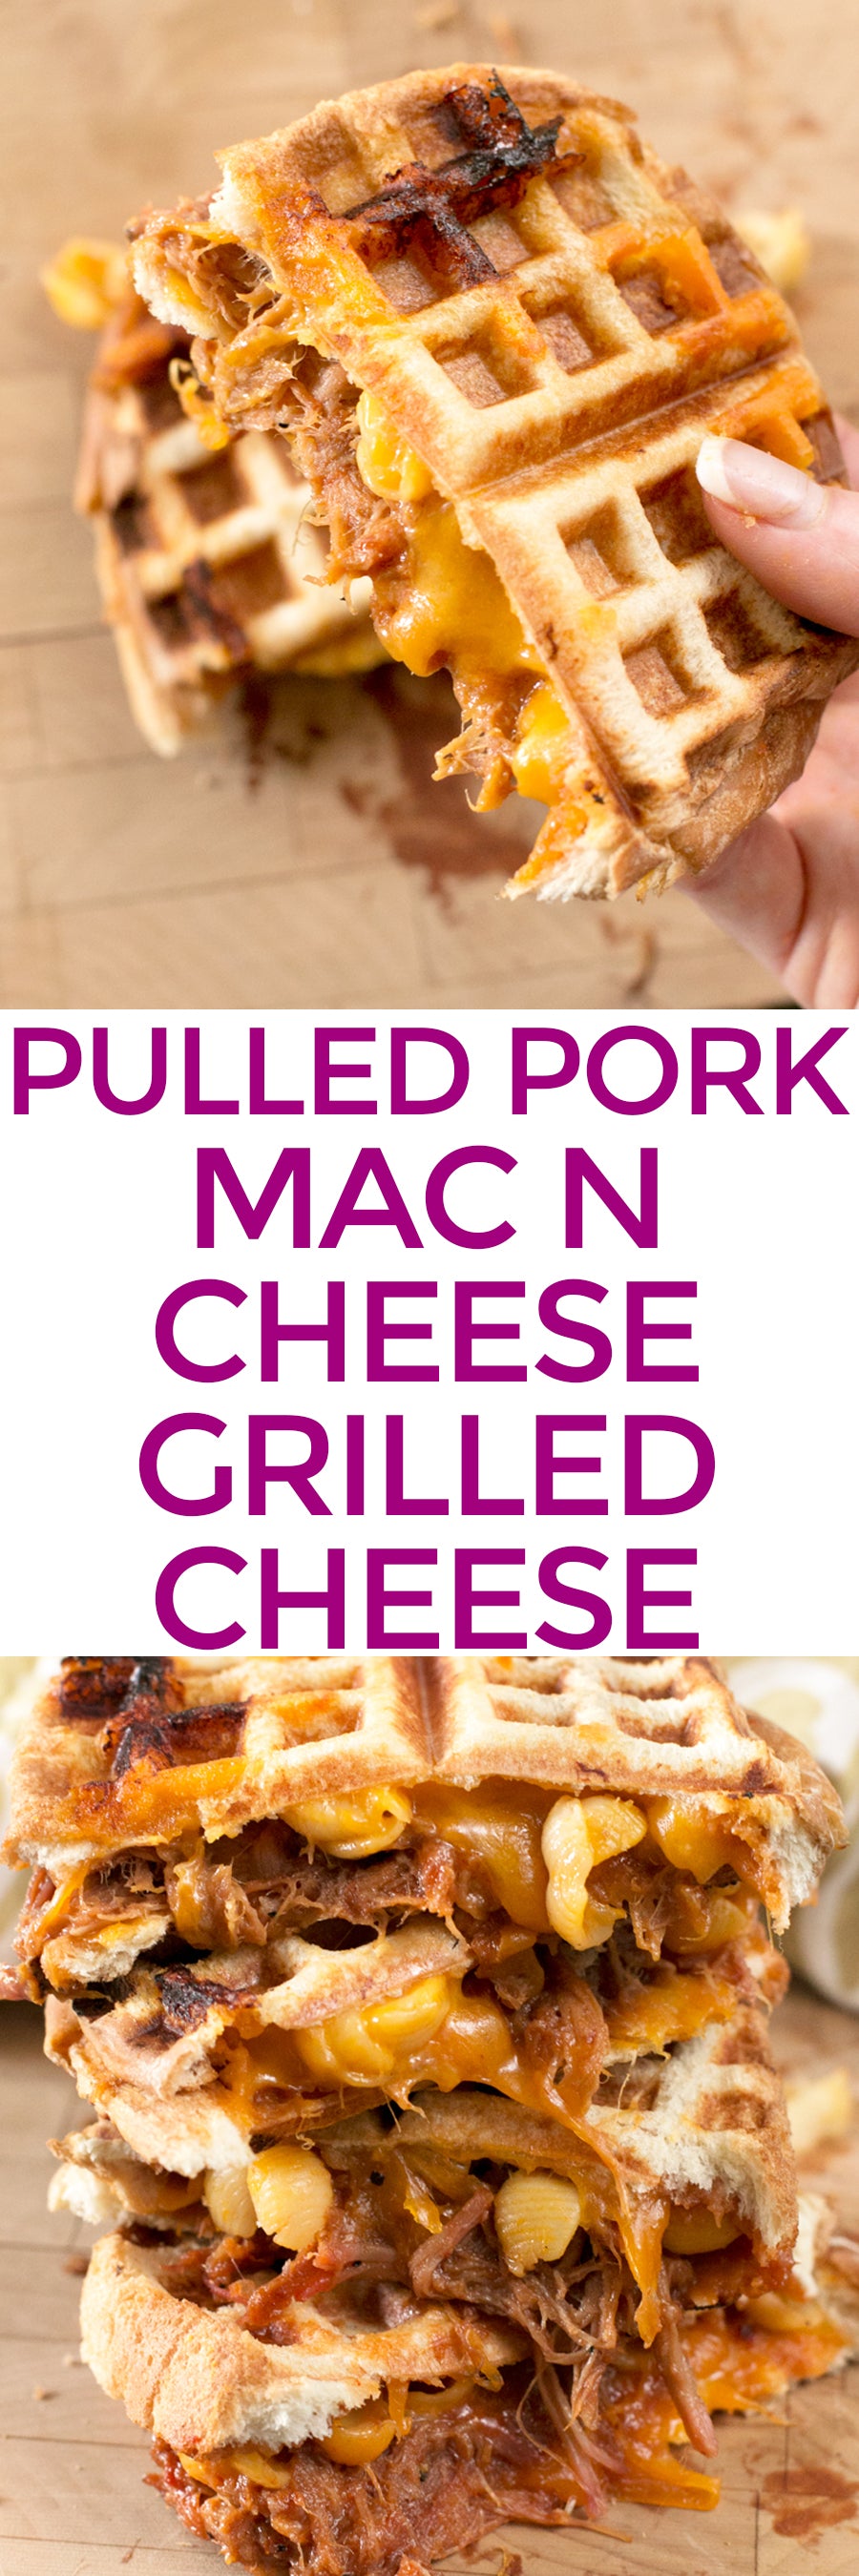 Pulled Pork Mac N Cheese Grilled Cheese | pigofthemonth.com #bbq #barbecue #pork #waffle